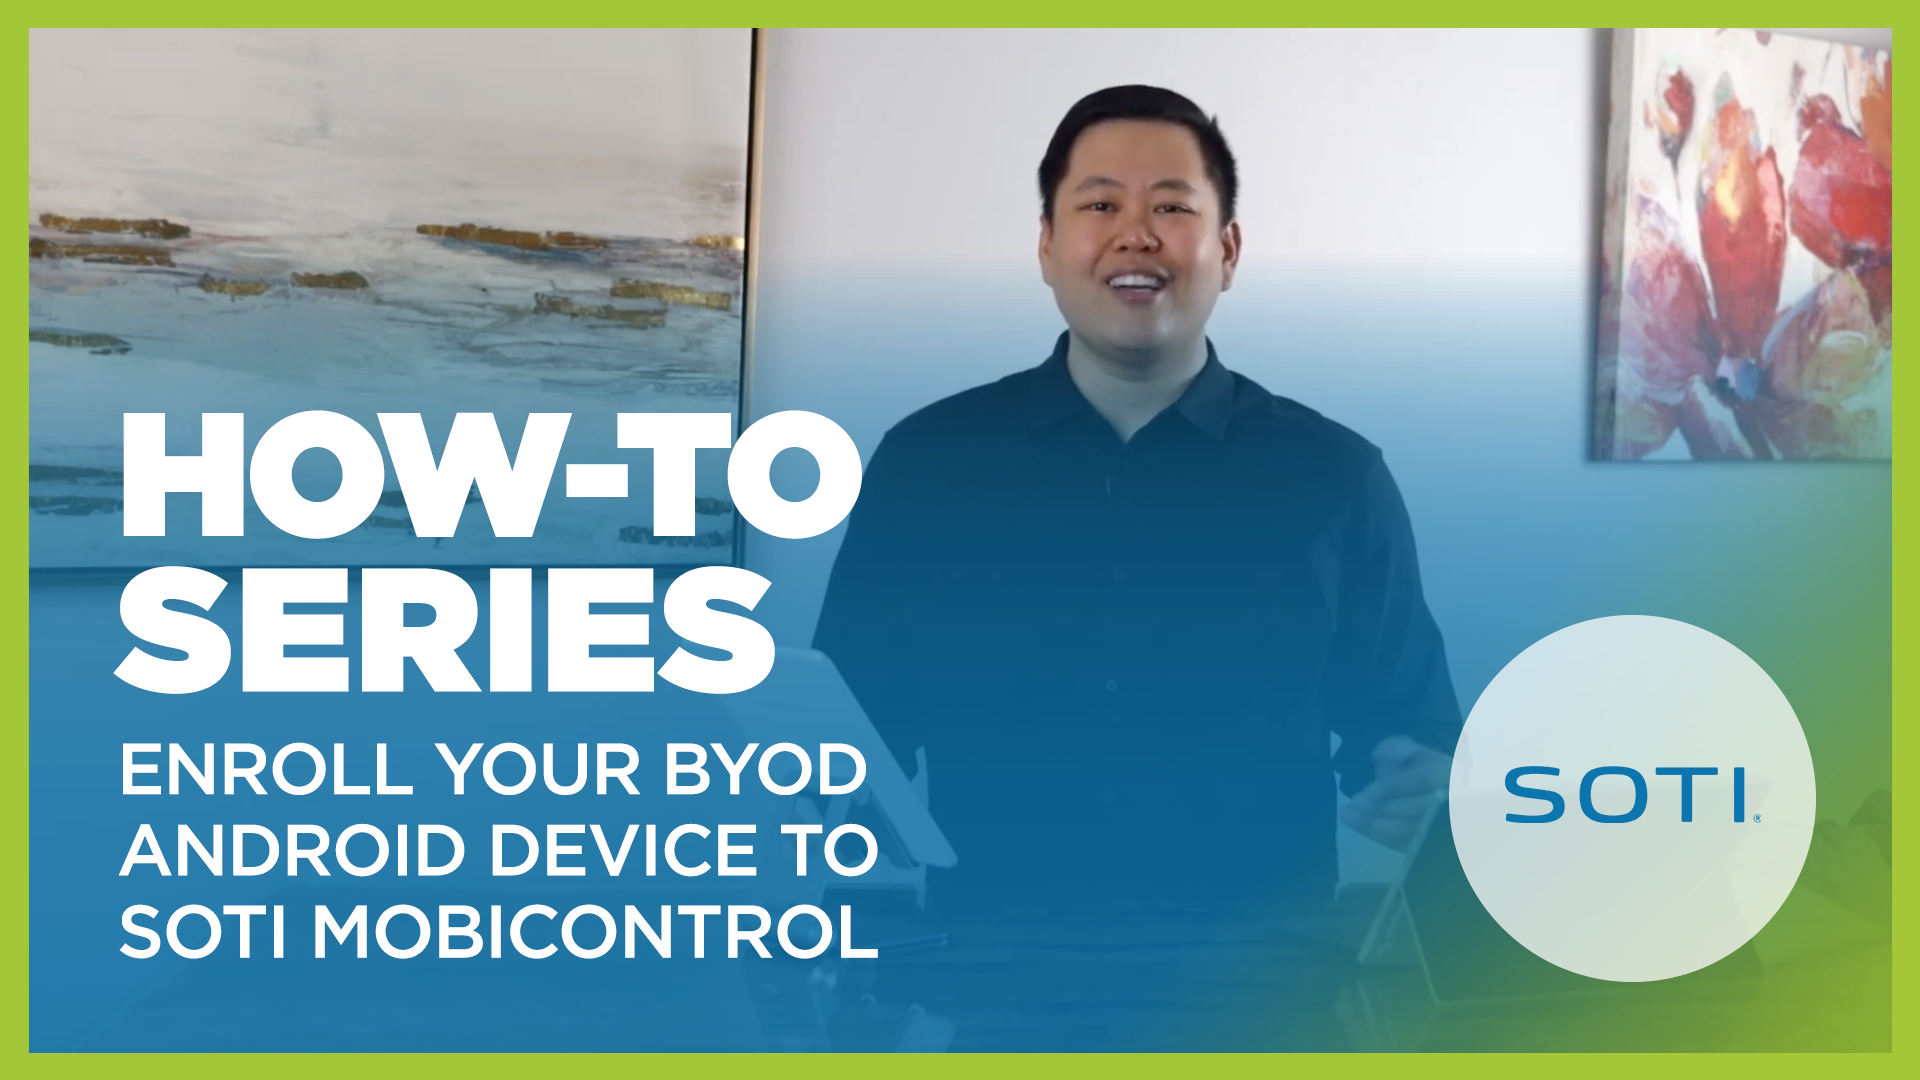 How To Enroll Your BYOD Android Device into SOTI MobiControl Video